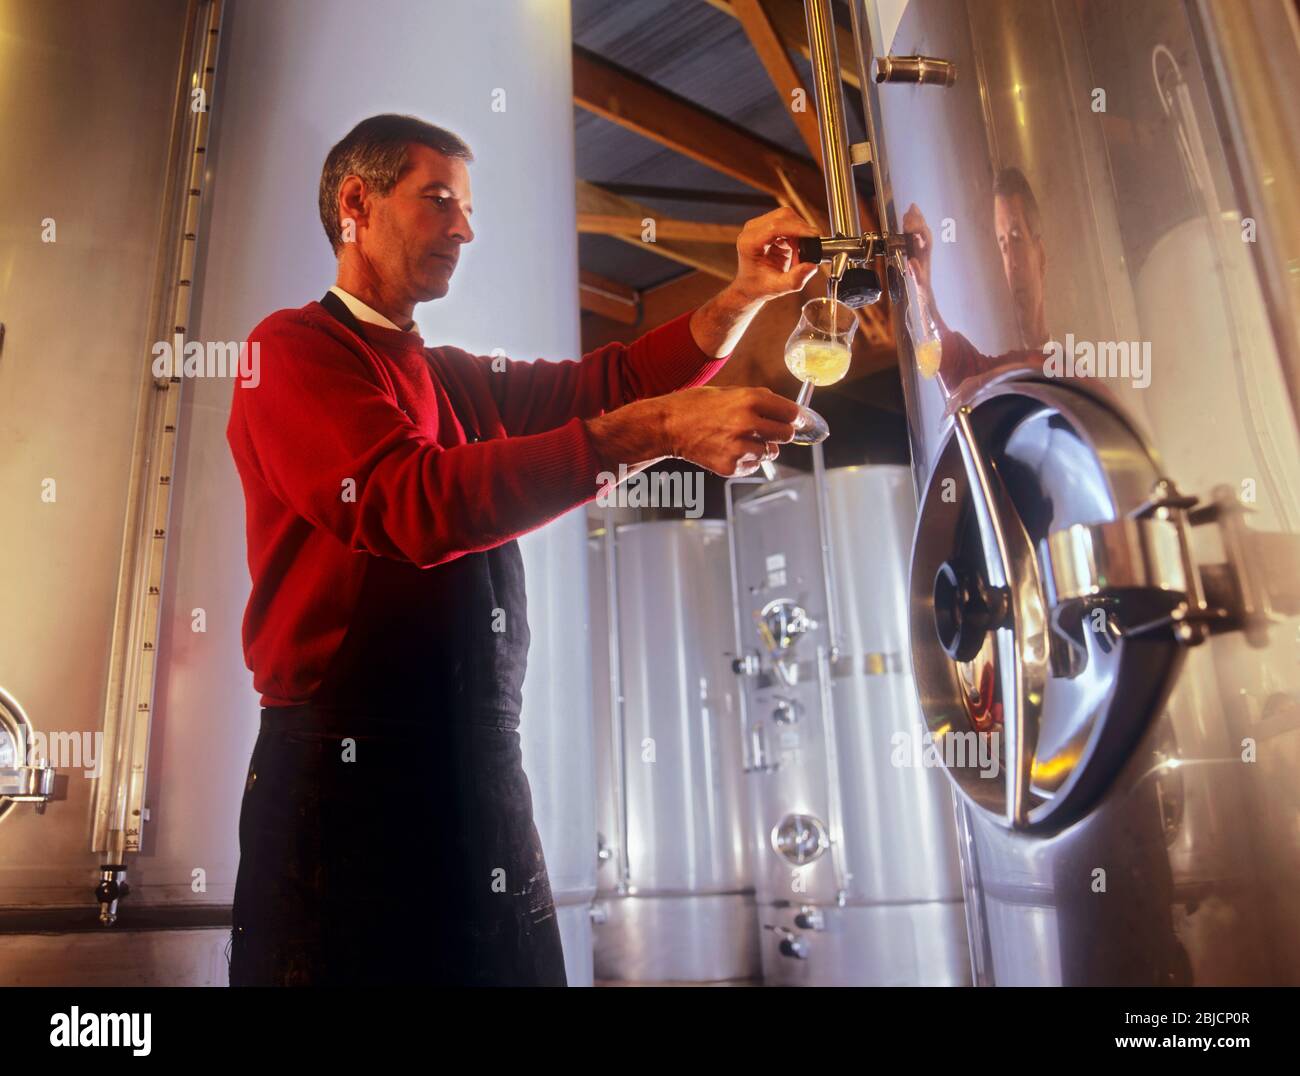 French winemaker tasting cellar master draws white chardonnay wine from hi-tech maturation tank Louis Latour Château de Grancey winery Burgundy France Stock Photo